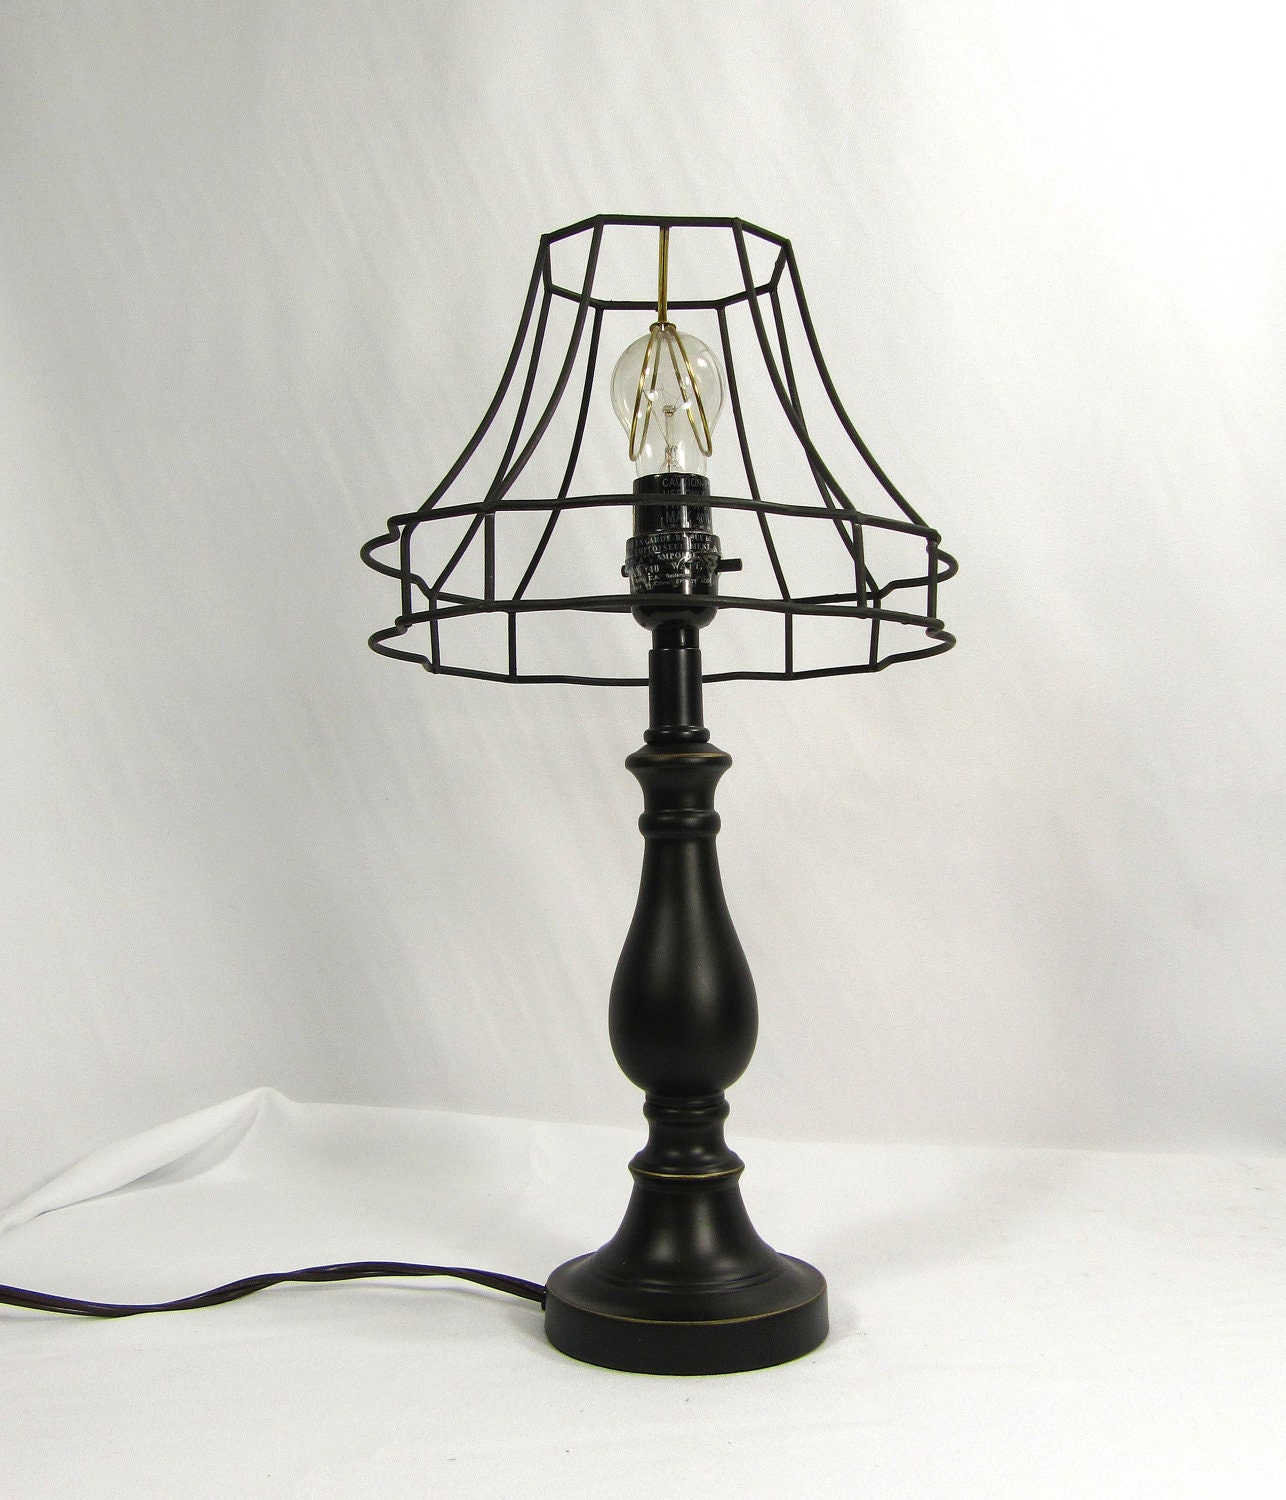 Black Lamp Shades on Black Lamp Minimalist Shade Wire Frame Hand Made Table Lamp